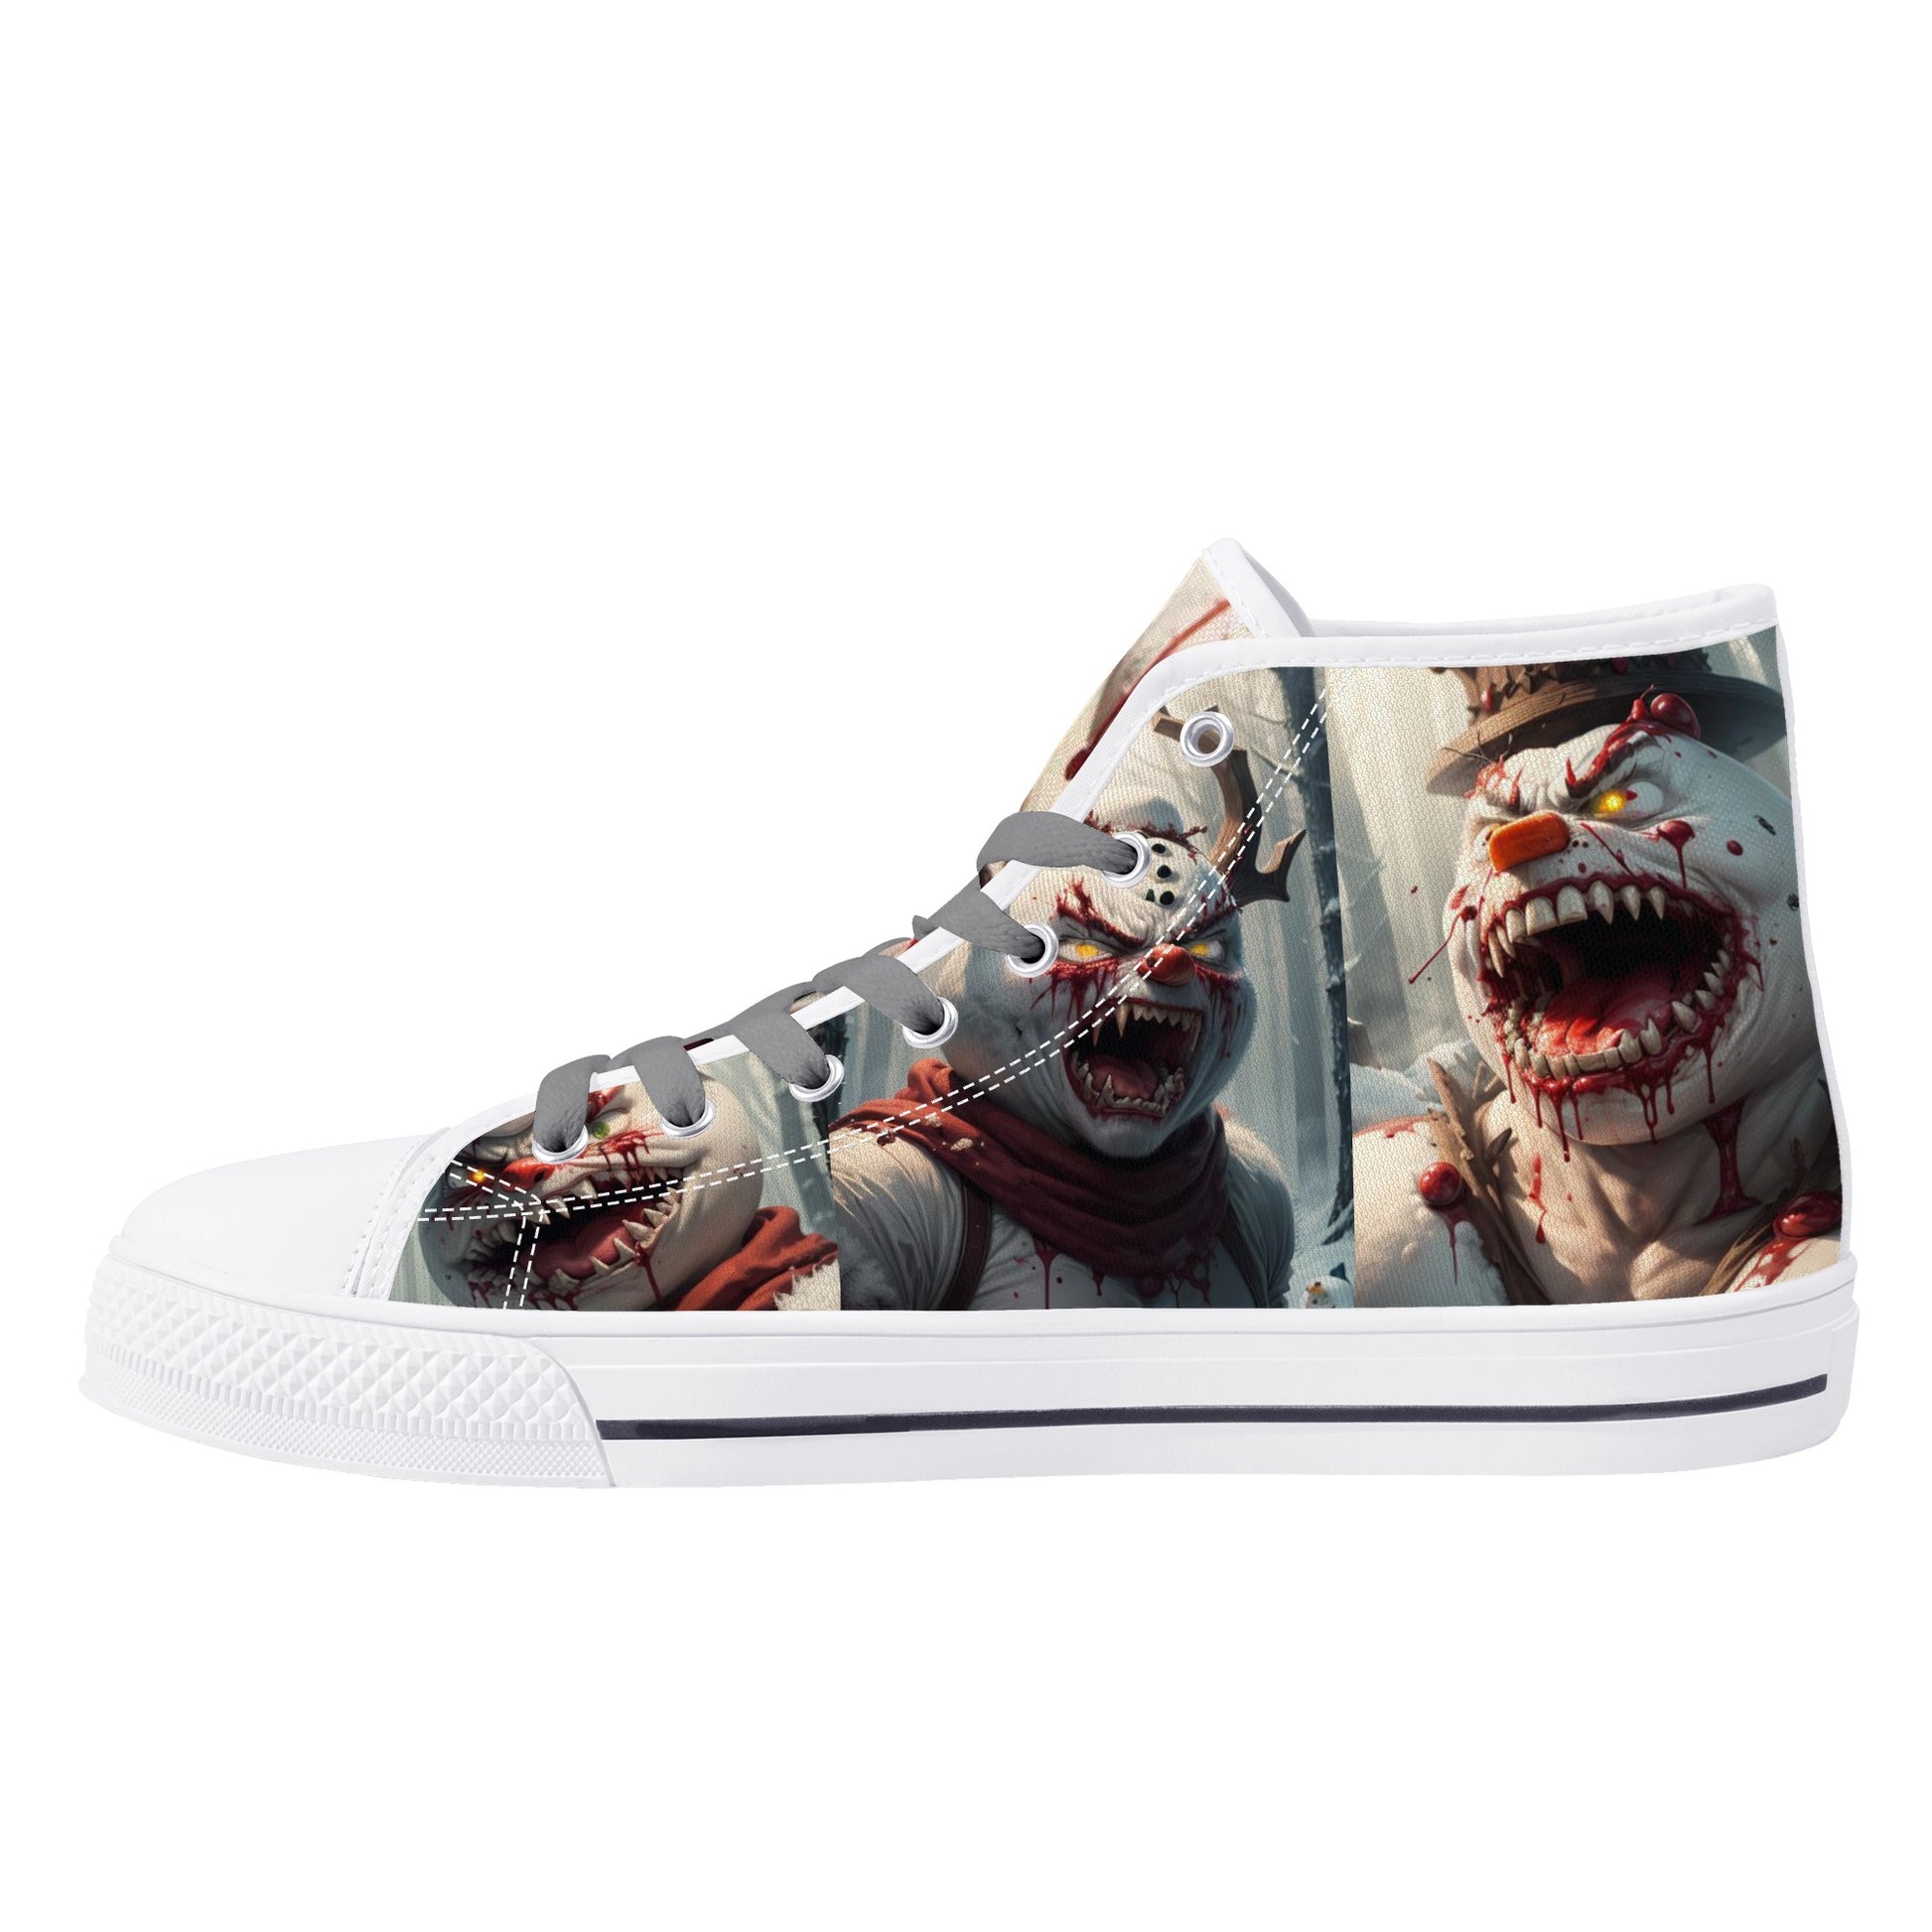 Stand out  with the  Frostys Revenge Womens High Top Canvas Shoes  available at Hey Nugget. Grab yours today!